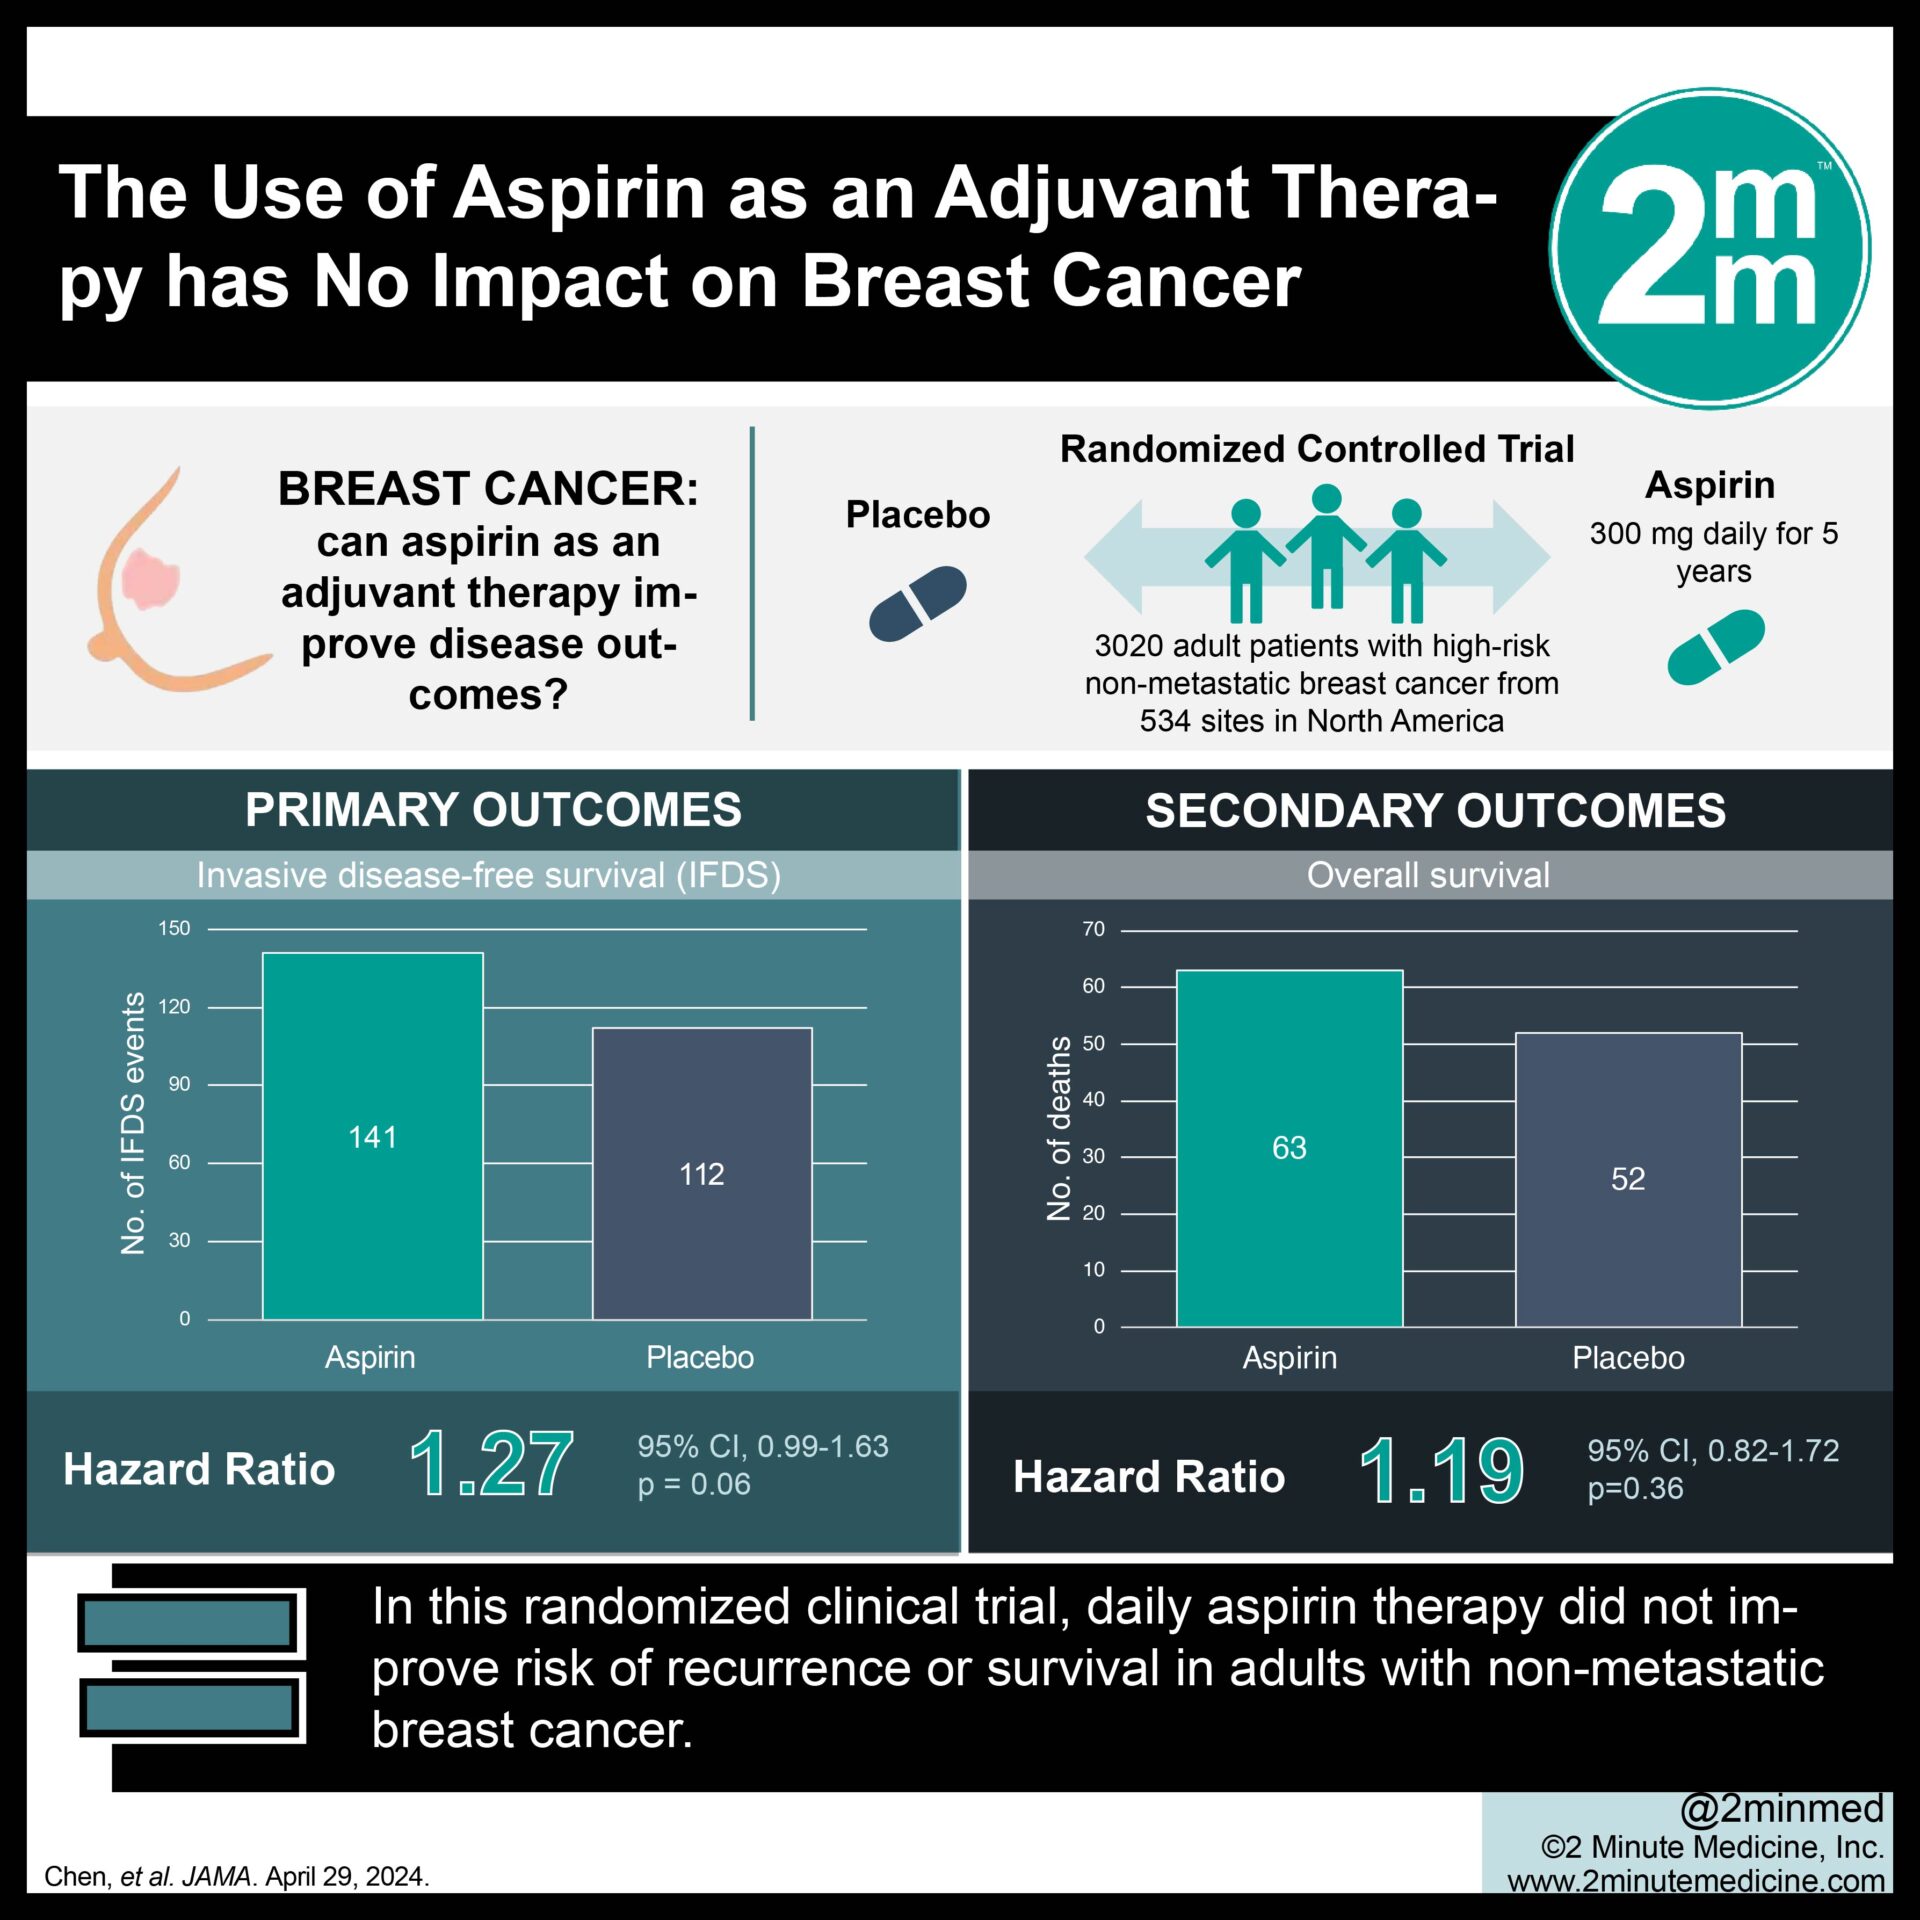 #VisualAbstract: The Use of Aspirin as an Adjuvant Therapy has No Impact on Breast Cancer